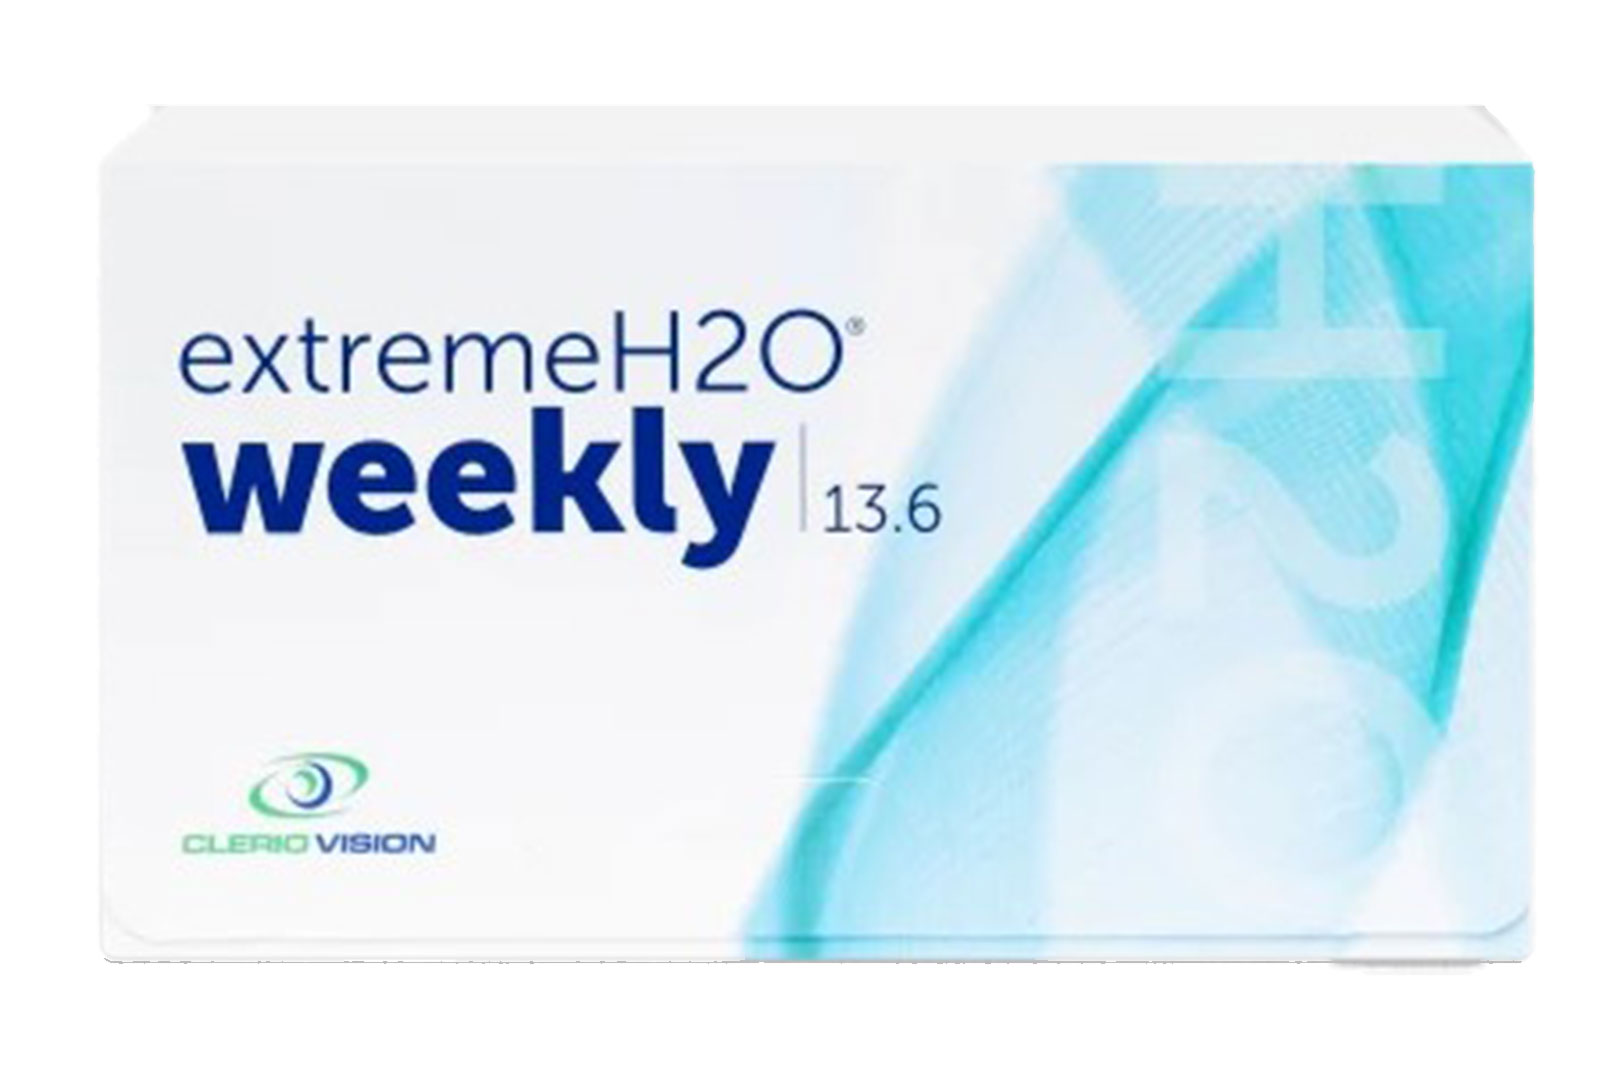 extreme-h2o-weekly-12-pack-contact-lenses-by-clerio-vision-8-3-14-20-1